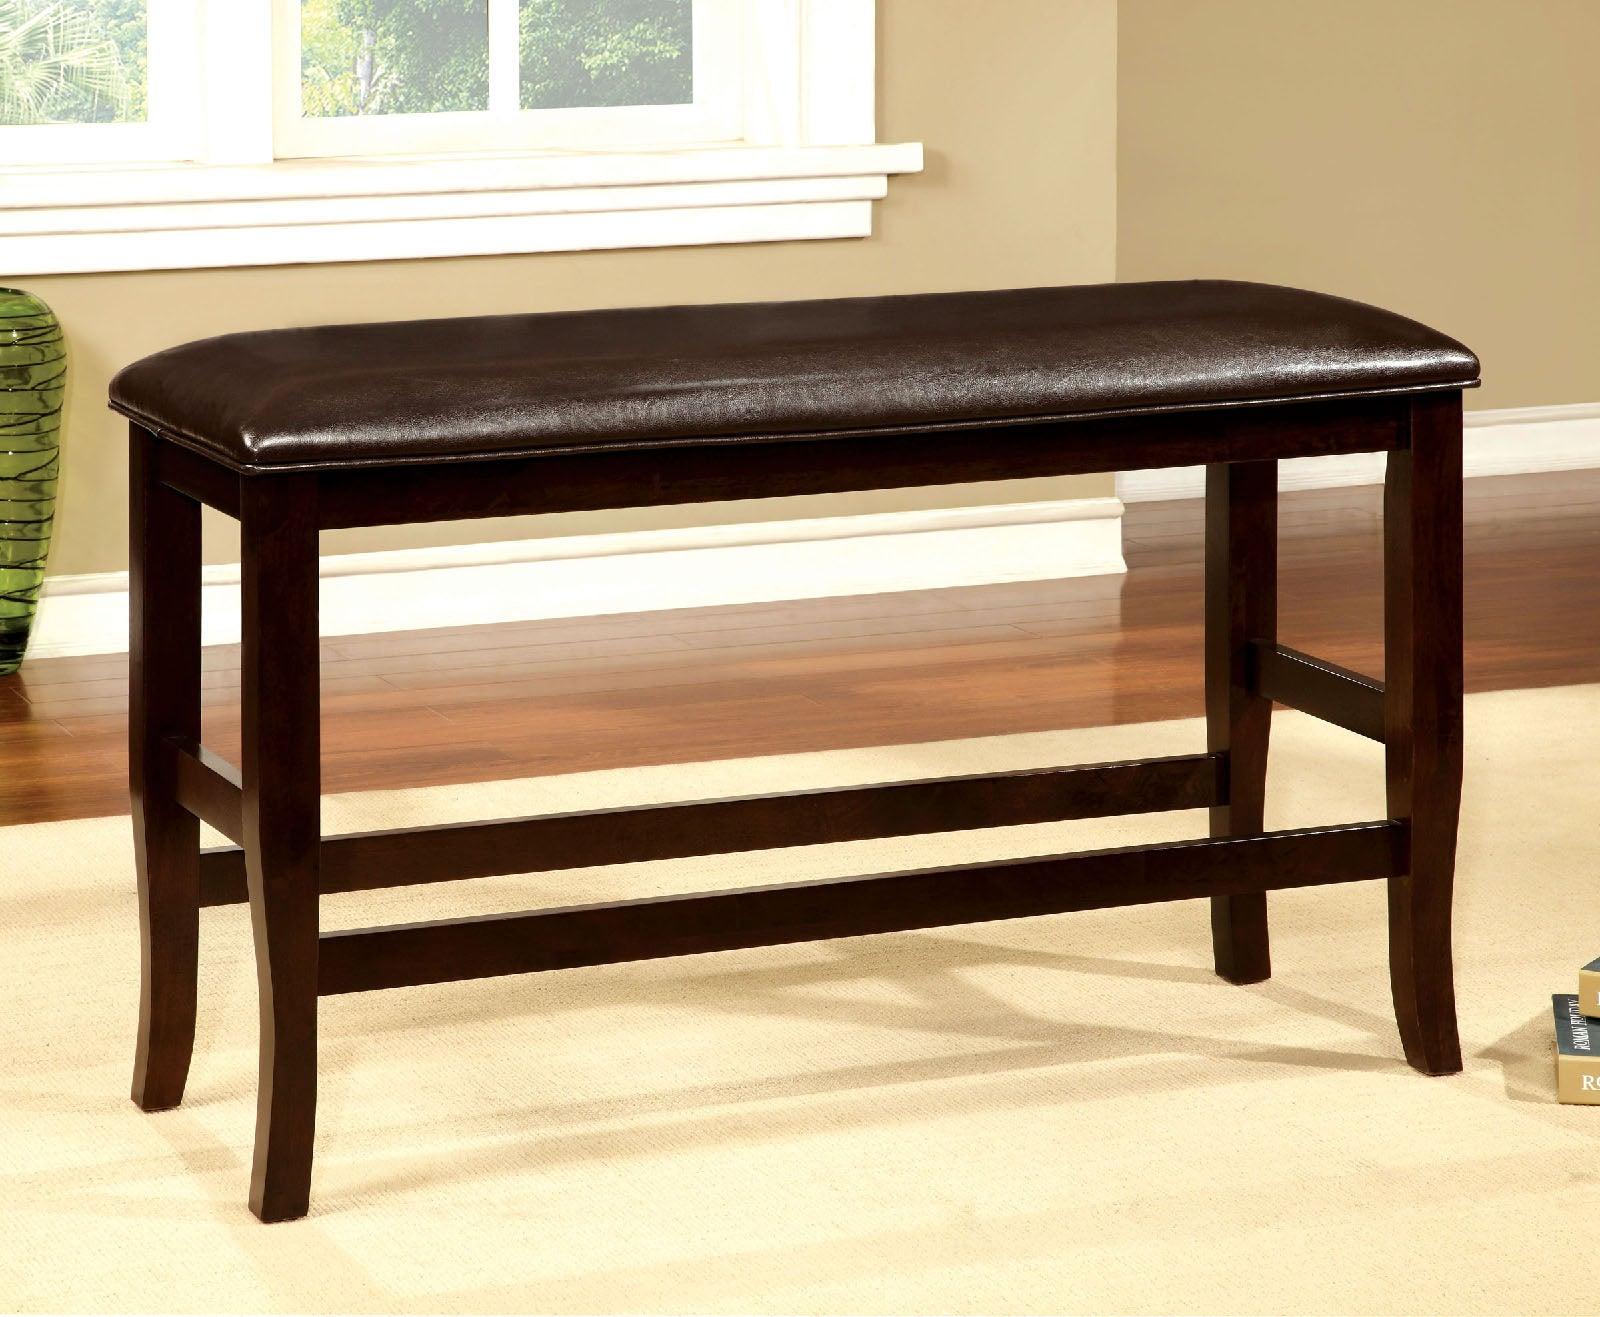 Transitional Counter Height Bench CM3024PBN Woodside CM3024PBN in Dark Cherry Leatherette